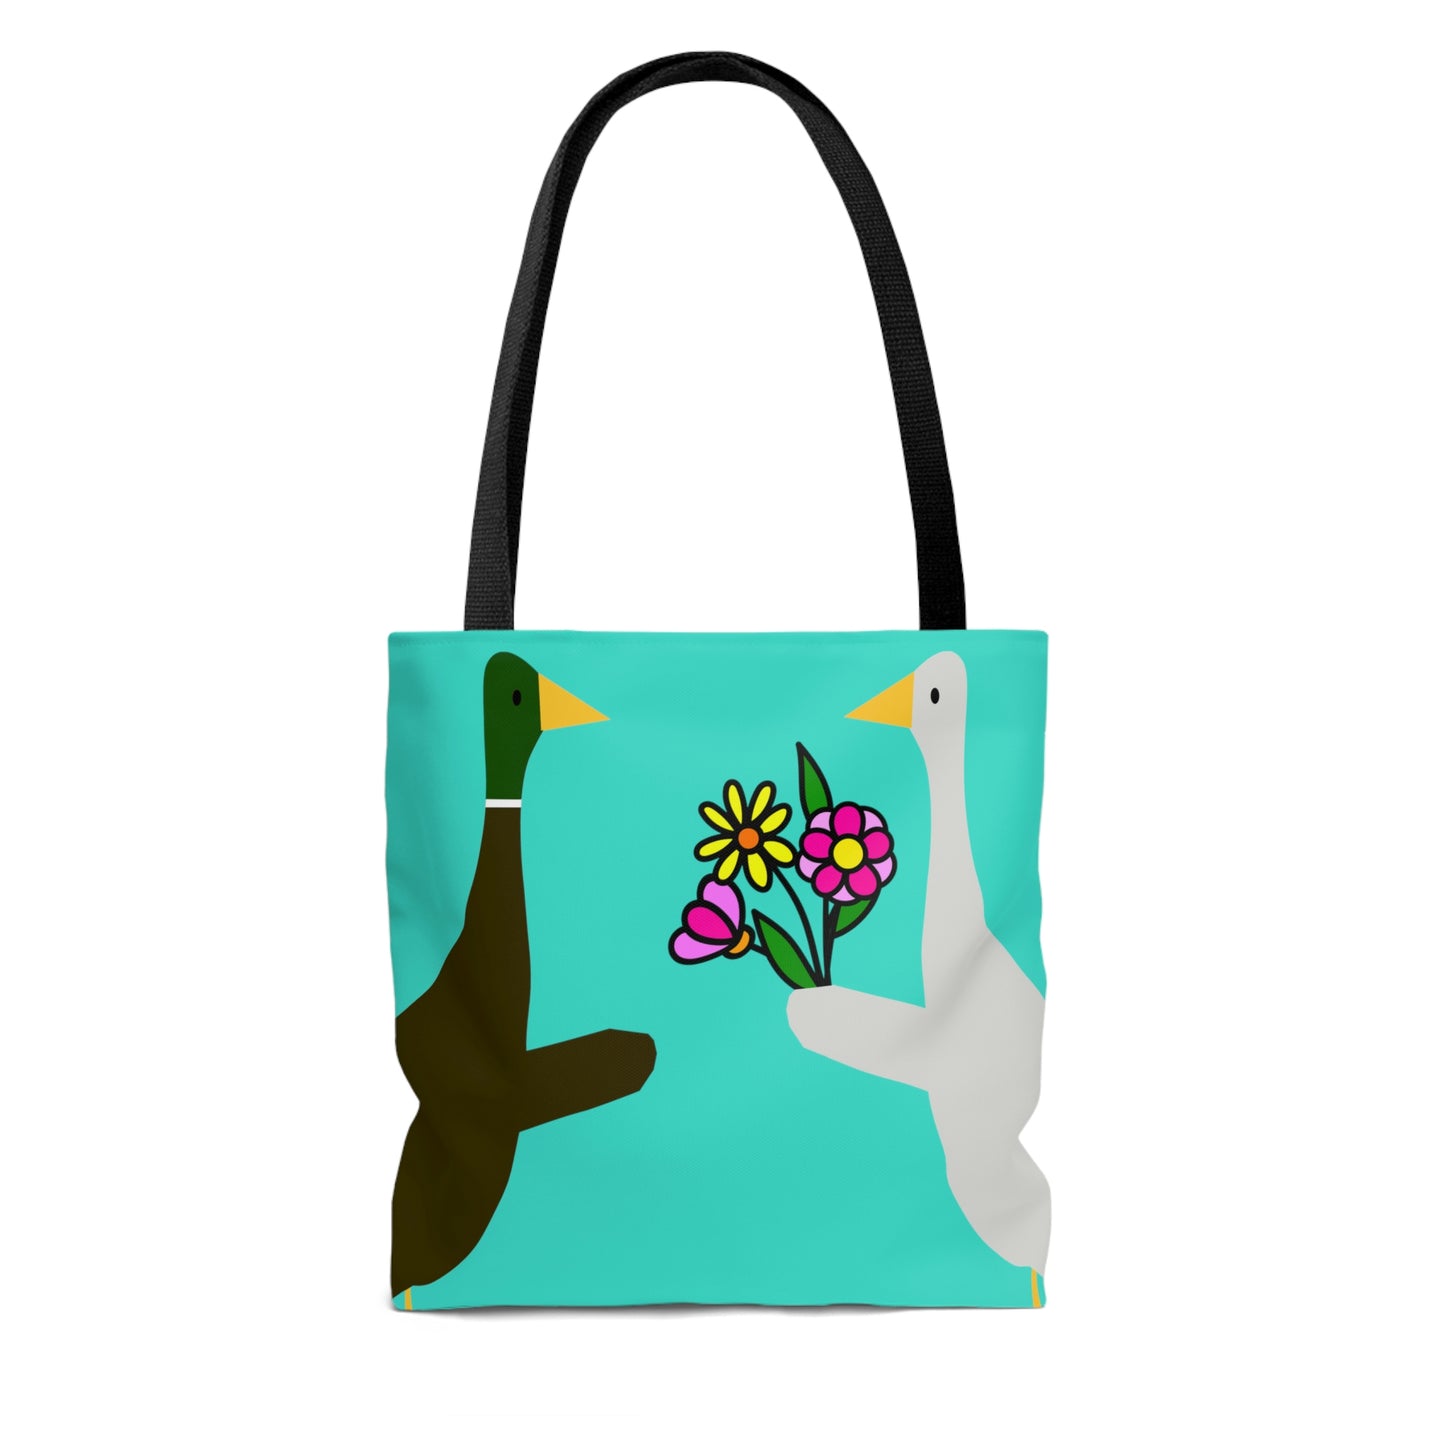 Ducks sharing flowers - Turquoise 40e0d0 - Tote Bag